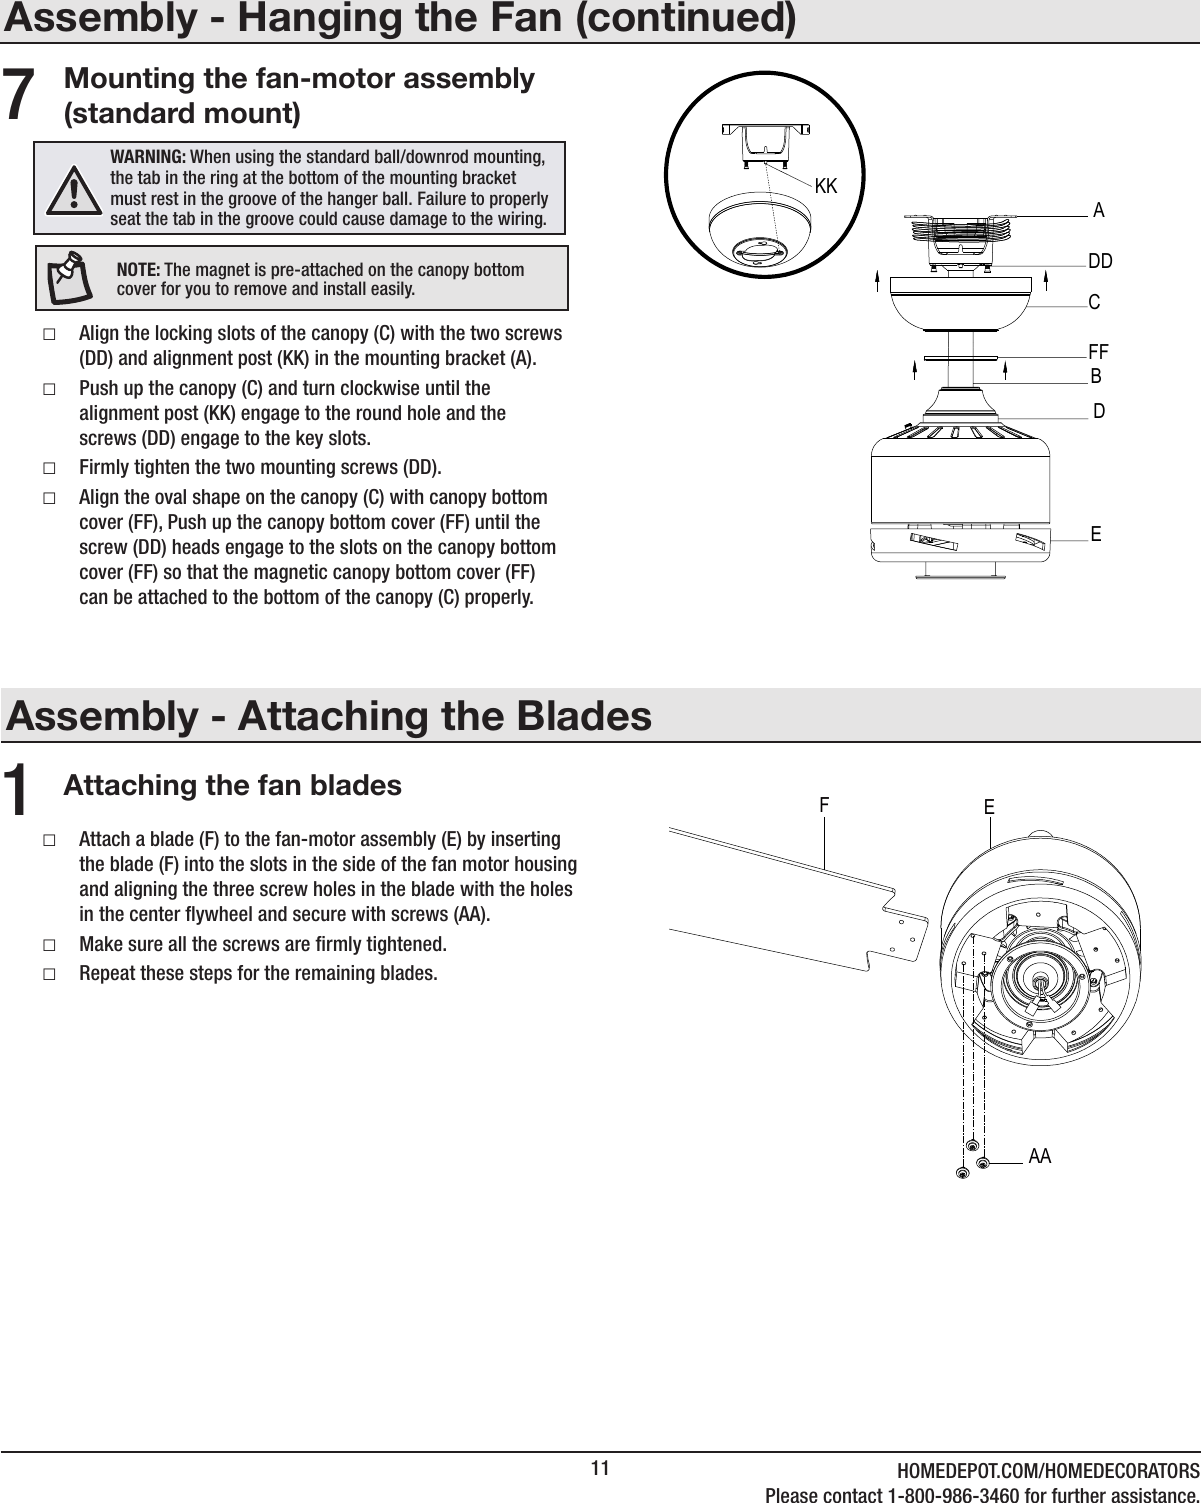 11 HOMEDEPOT.COM/HOMEDECORATORSPlease contact 1-800-986-3460 for further assistance.Assembly - Attaching the BladesAttaching the fan blades1 □Attach a blade (F) to the fan-motor assembly (E) by inserting the blade (F) into the slots in the side of the fan motor housing and aligning the three screw holes in the blade with the holes in the center ywheel and secure with screws (AA). □Make sure all the screws are rmly tightened. □Repeat these steps for the remaining blades.Assembly - Hanging the Fan (continued)Mounting the fan-motor assembly (standard mount) □Align the locking slots of the canopy (C) with the two screws (DD) and alignment post (KK) in the mounting bracket (A). □Push up the canopy (C) and turn clockwise until the alignment post (KK) engage to the round hole and the screws (DD) engage to the key slots. □Firmly tighten the two mounting screws (DD). □Align the oval shape on the canopy (C) with canopy bottom cover (FF), Push up the canopy bottom cover (FF) until the screw (DD) heads engage to the slots on the canopy bottom cover (FF) so that the magnetic canopy bottom cover (FF) can be attached to the bottom of the canopy (C) properly.7WARNING: When using the standard ball/downrod mounting, the tab in the ring at the bottom of the mounting bracket must rest in the groove of the hanger ball. Failure to properly seat the tab in the groove could cause damage to the wiring.NOTE: The magnet is pre-attached on the canopy bottom cover for you to remove and install easily.CADDFFBEKKDAAEF